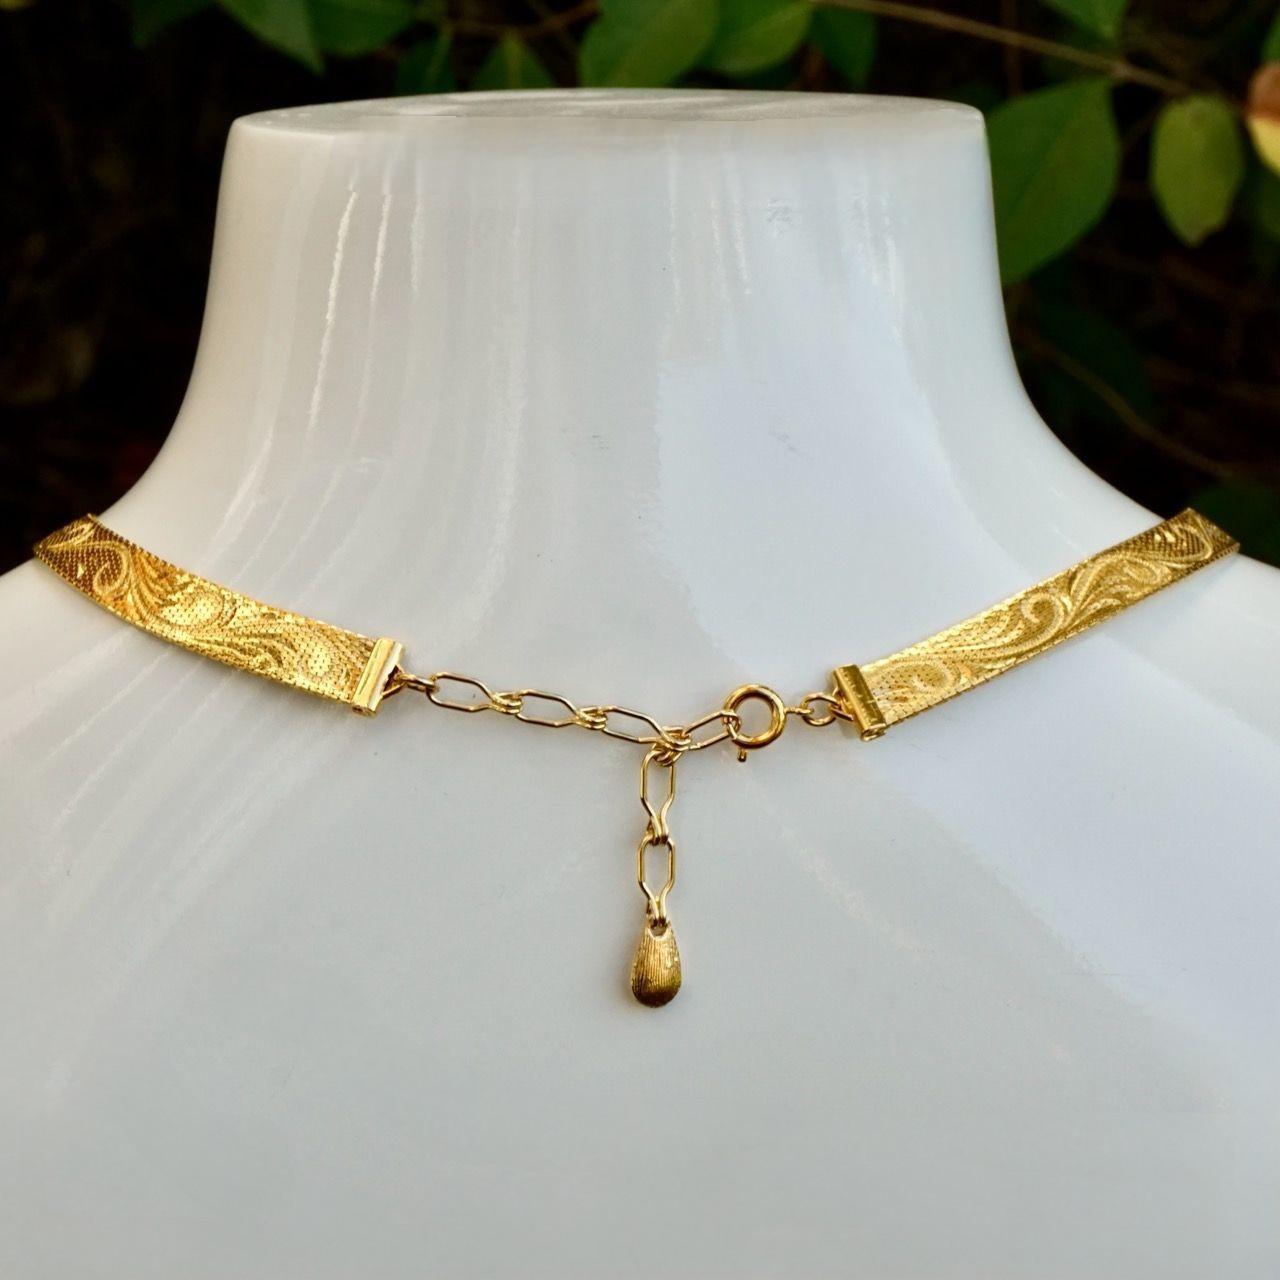 Gold Plated Swirl Design Egyptian Revival Mesh Collar Necklace circa 1980s 2